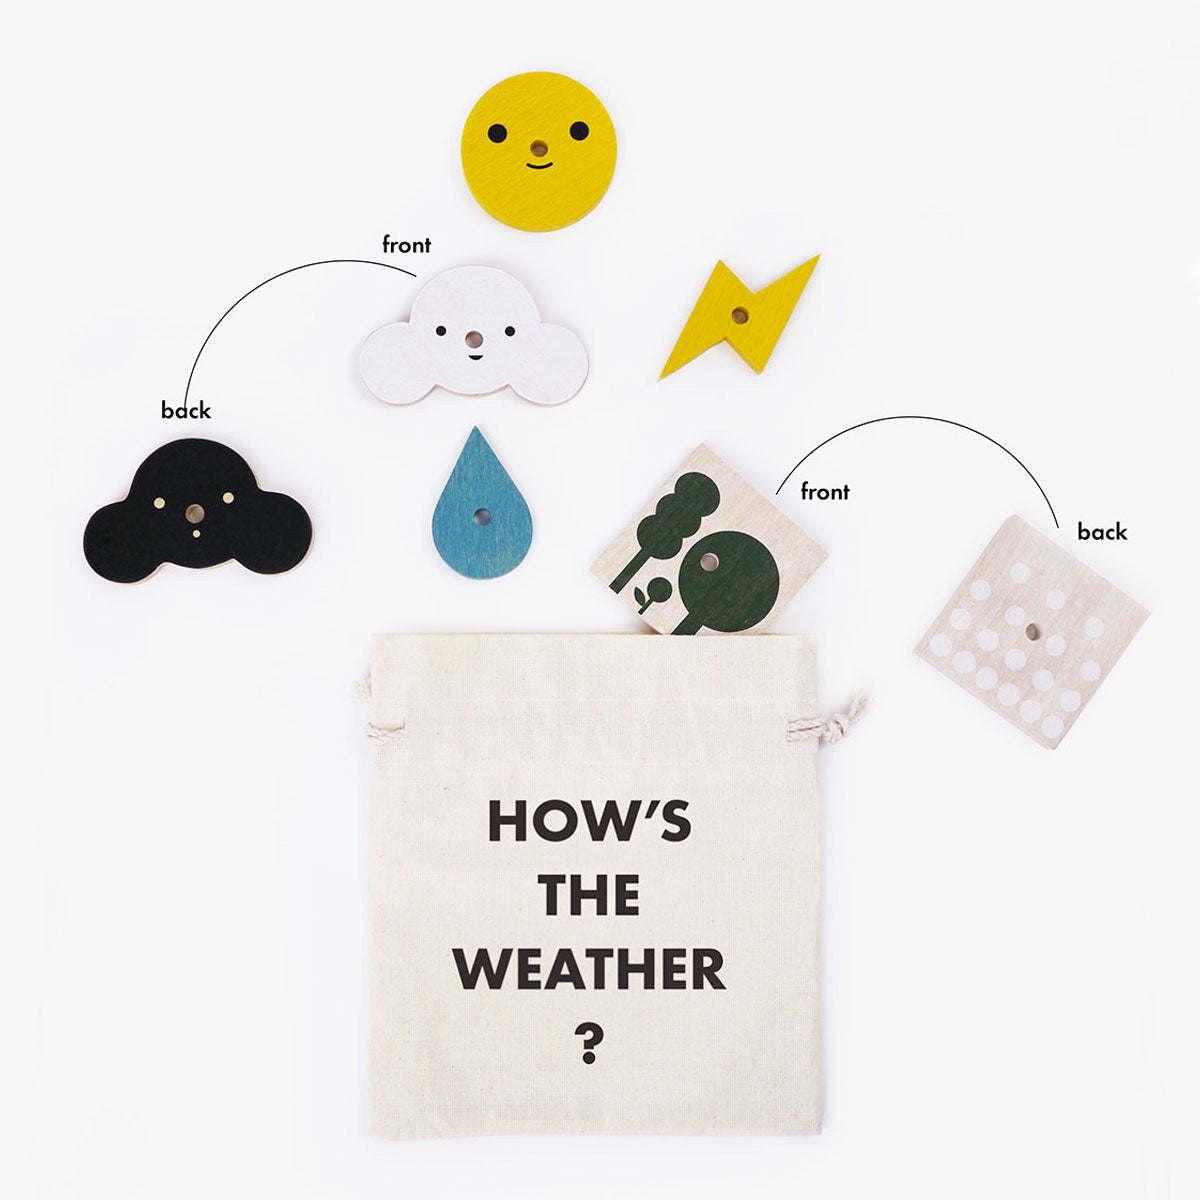 Moon Picnic | My Weather Station